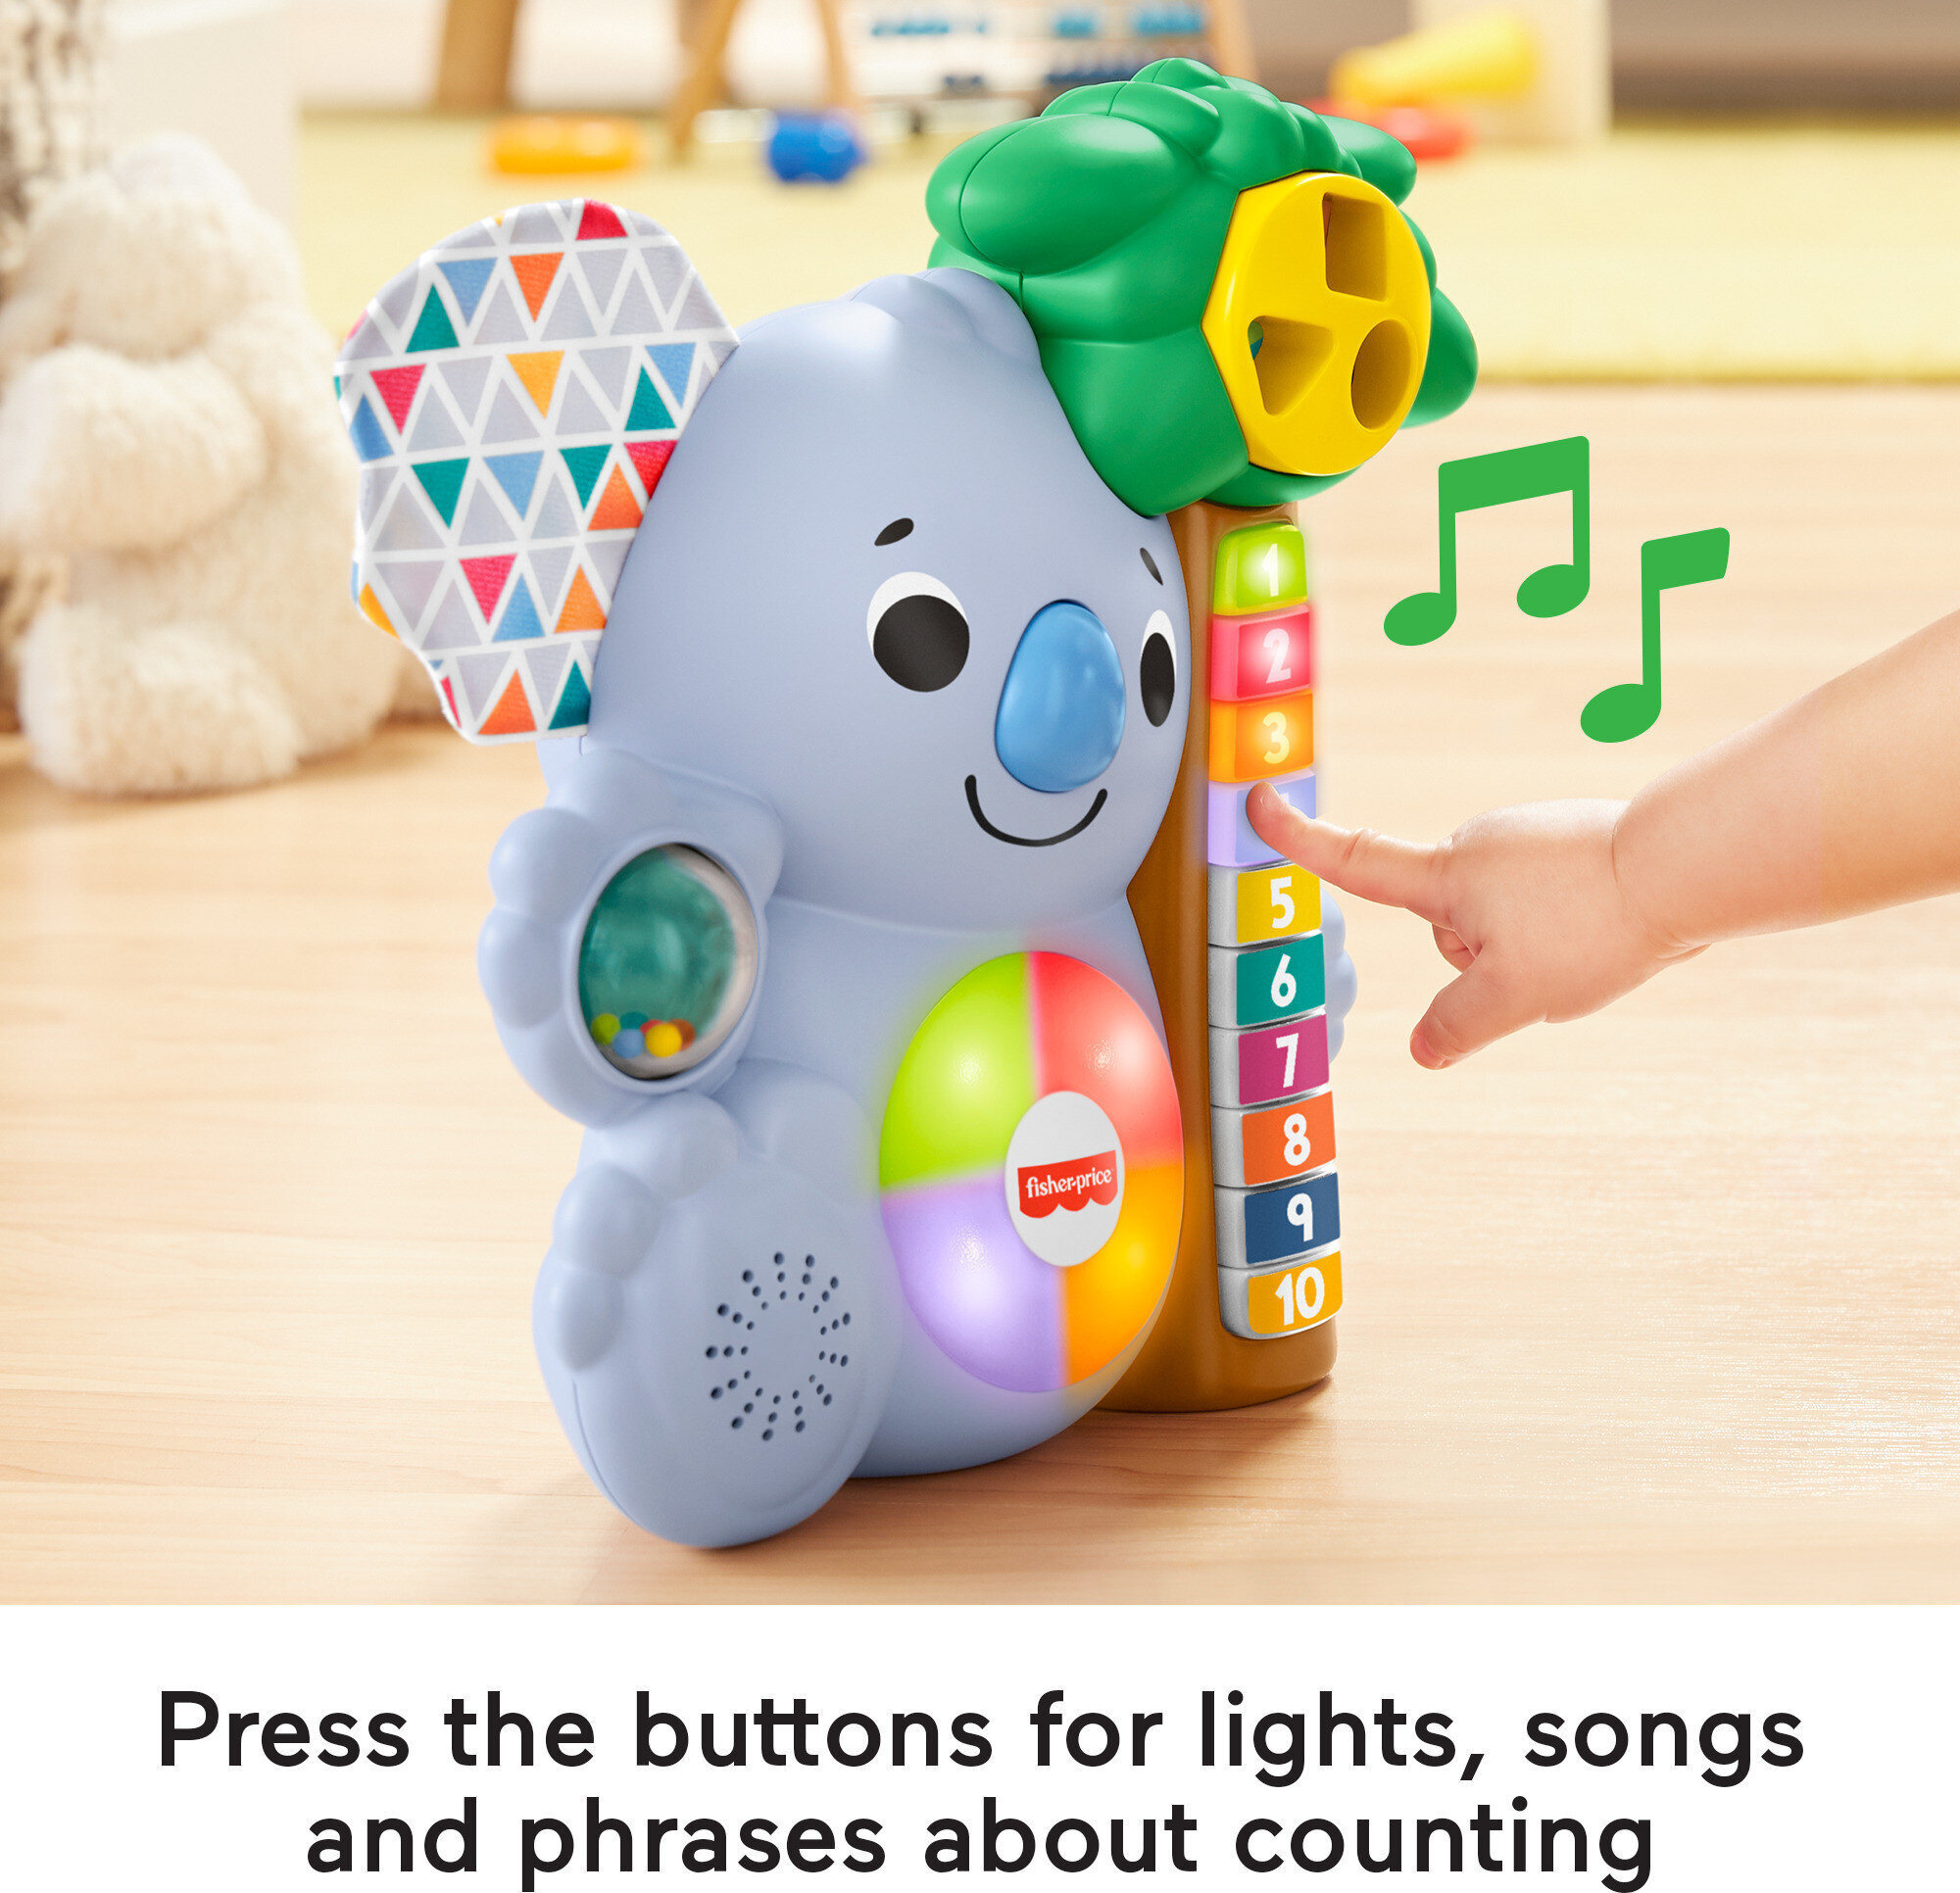 Fisher-Price Linkimals Counting Koala Baby & Toddler Learning Toy with Music & Lights - image 4 of 7